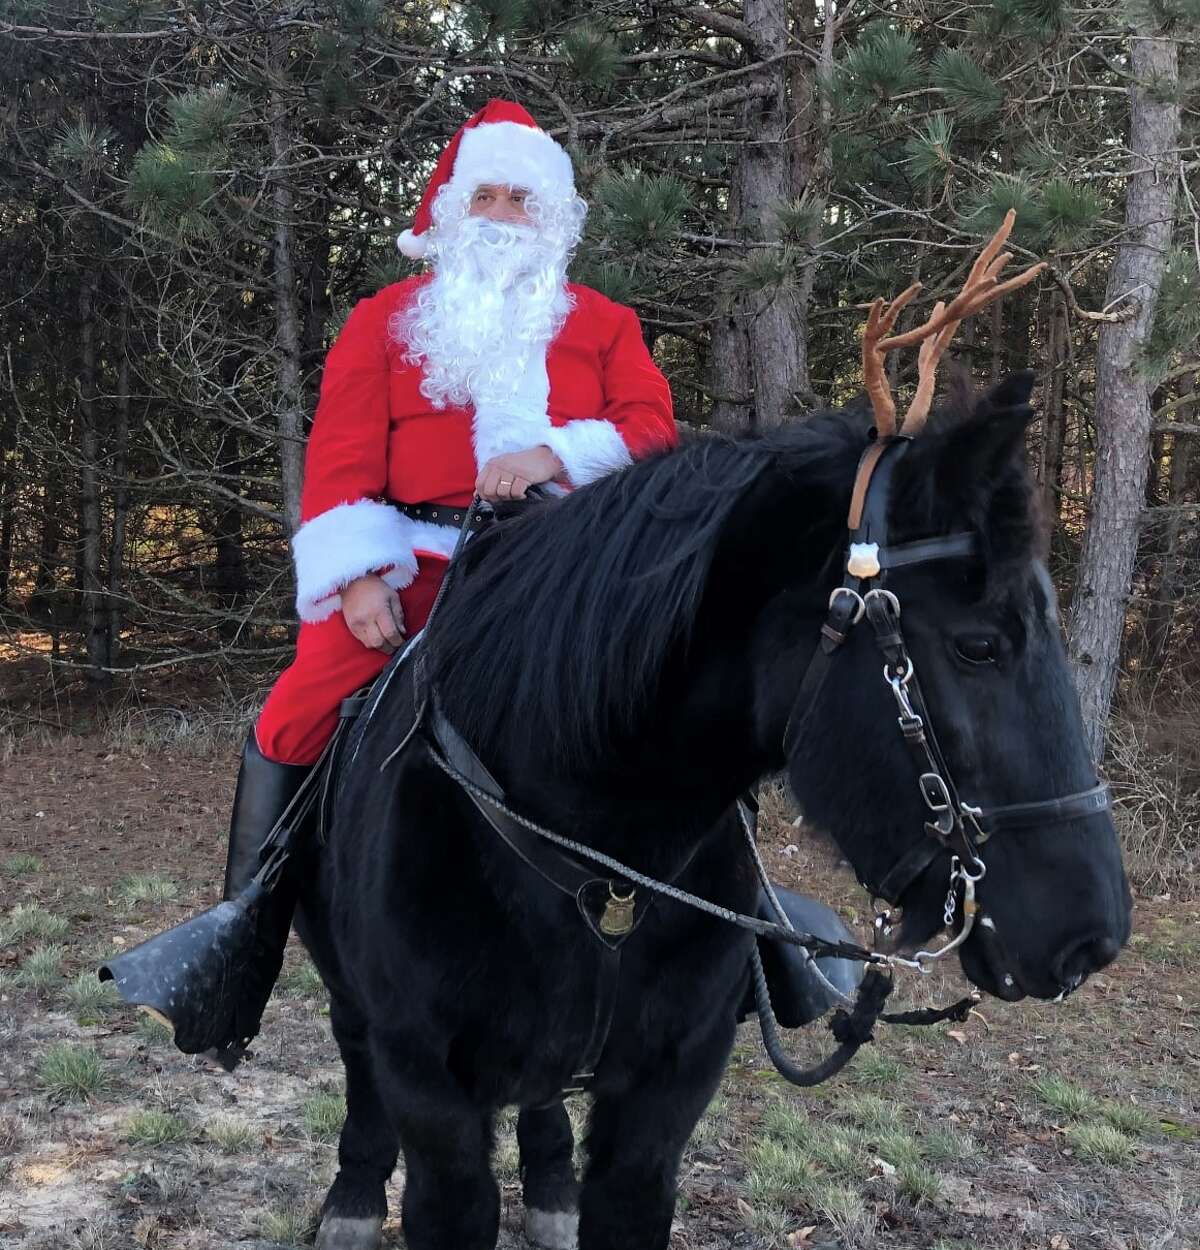 Santa and his "reindeer" Boomer will be on hand for photos at the annual Season of Giving Gift Drive to benefit Eagle Village from 9 a.m. to noon, Saturday, Dec. 11, at the Big Rapids Department of Public Safety.